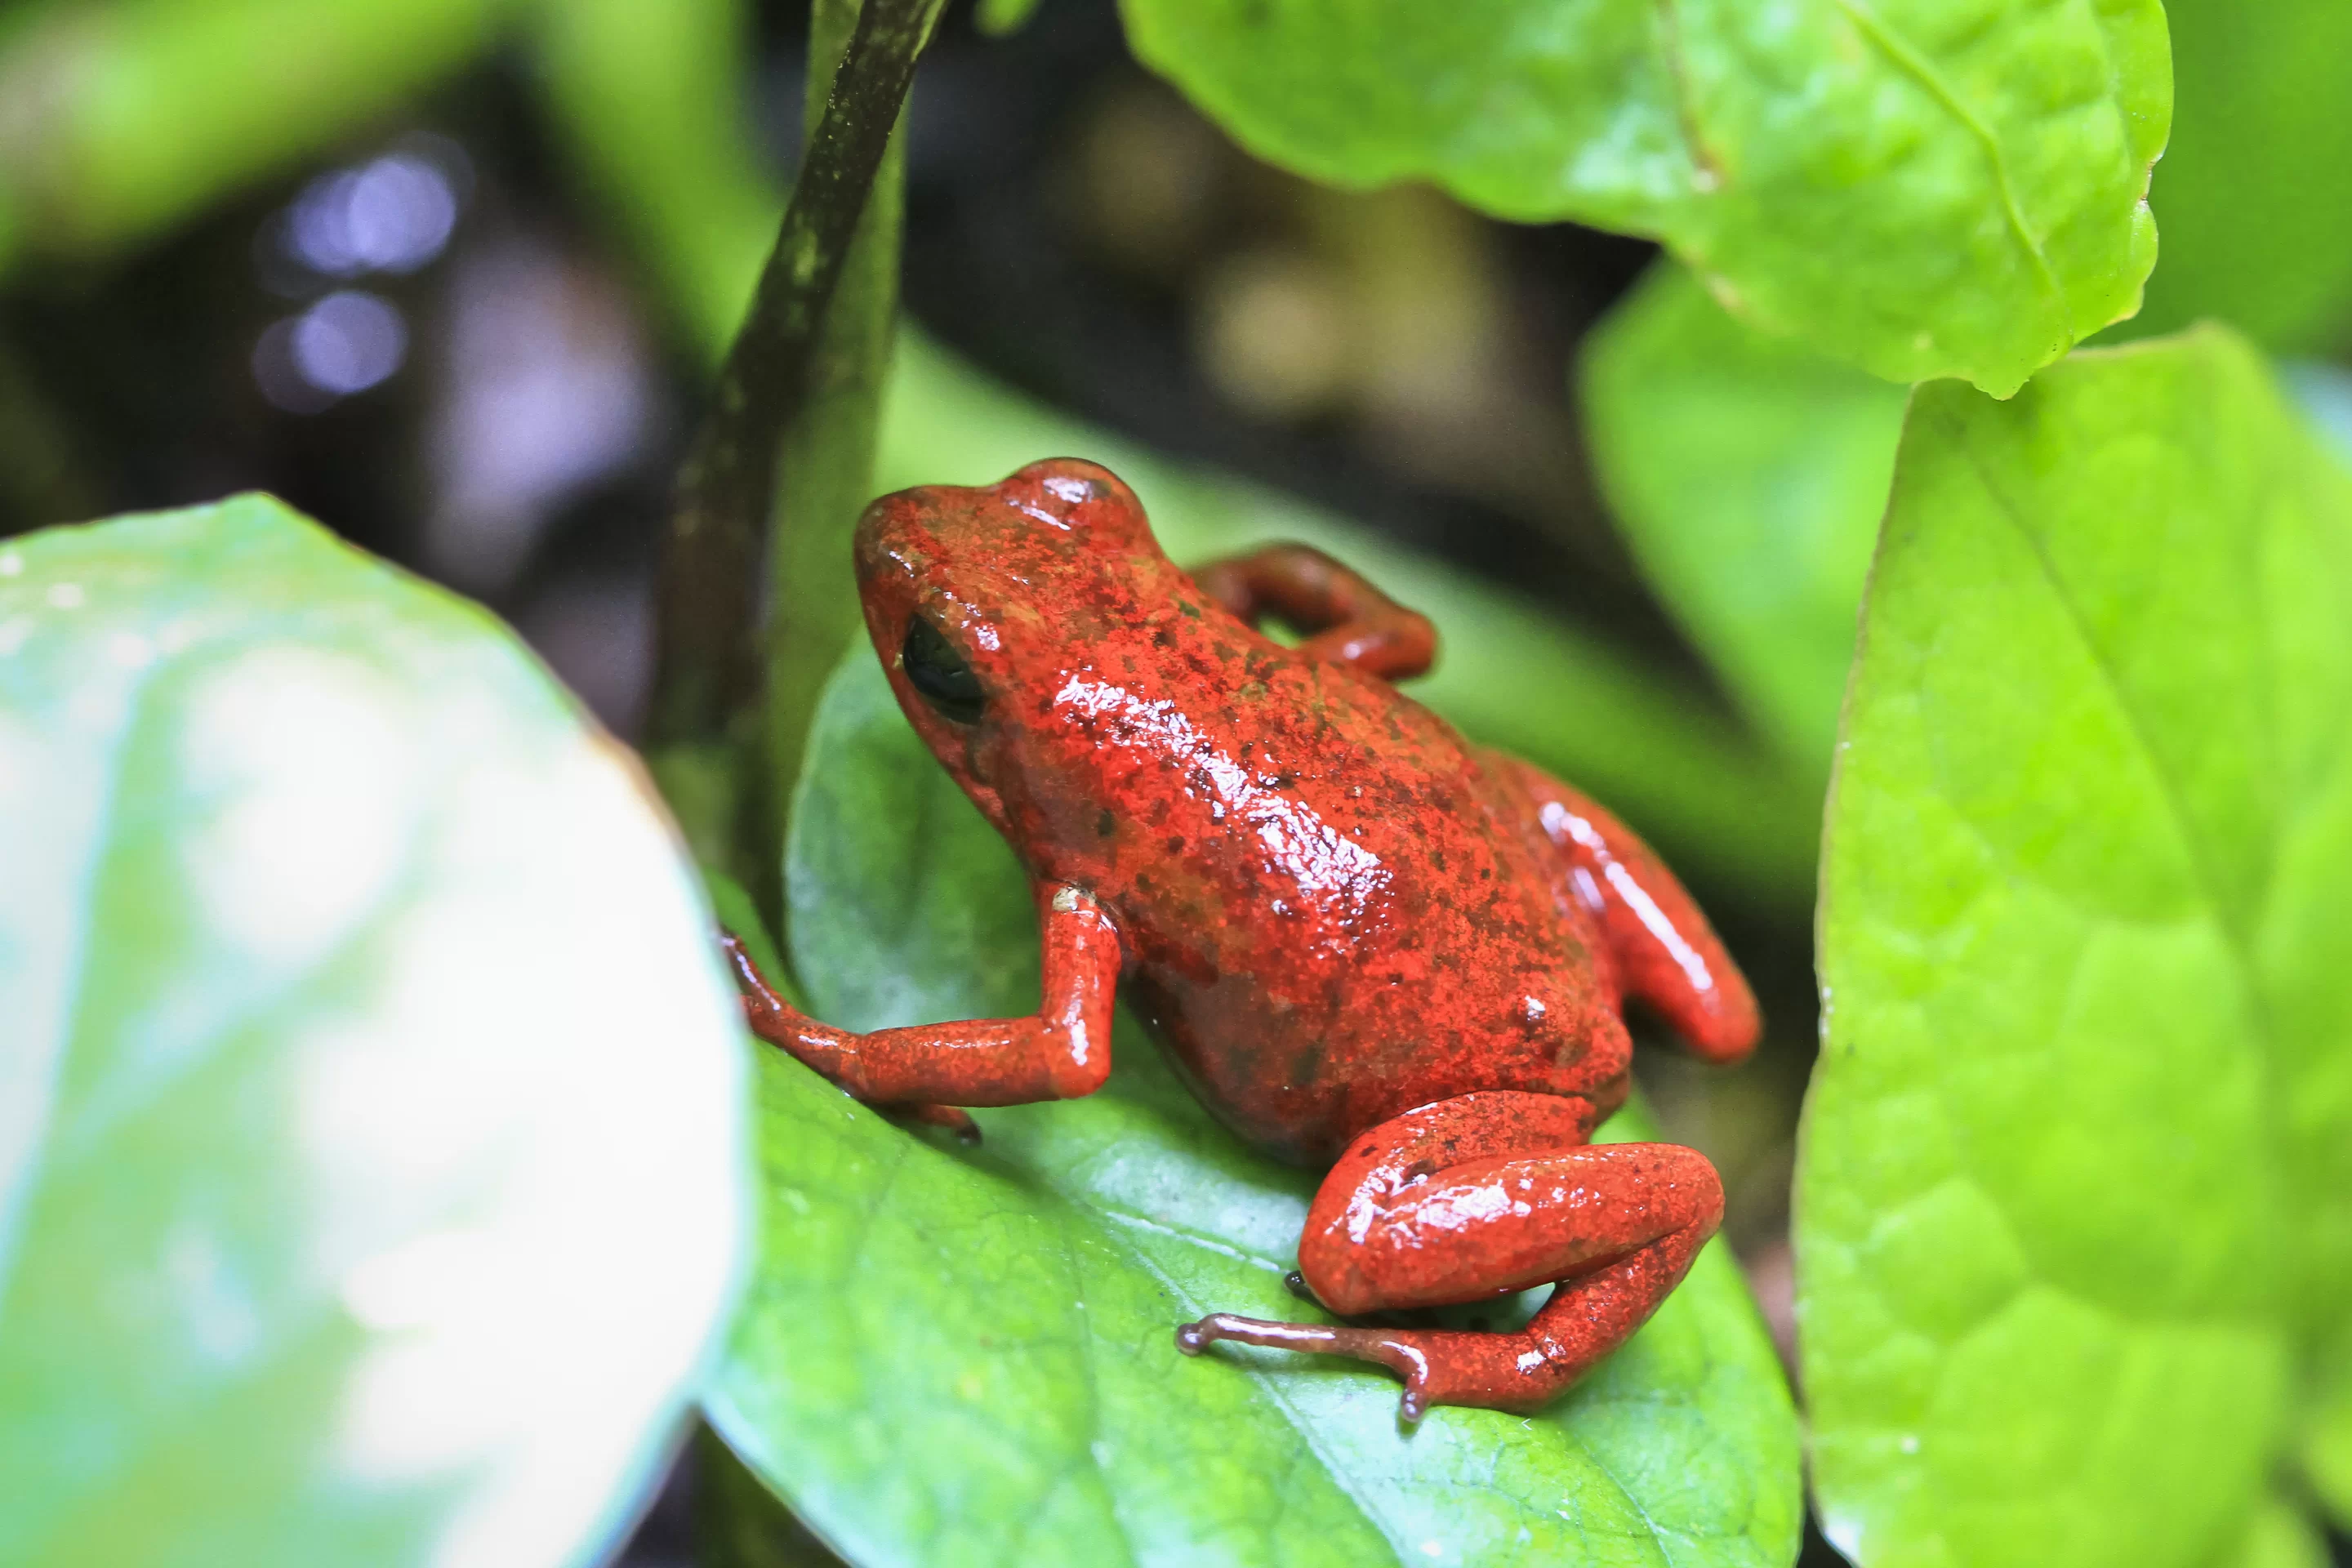 Keep an eye out for the vibrant dart frogs hopping among the foliage.